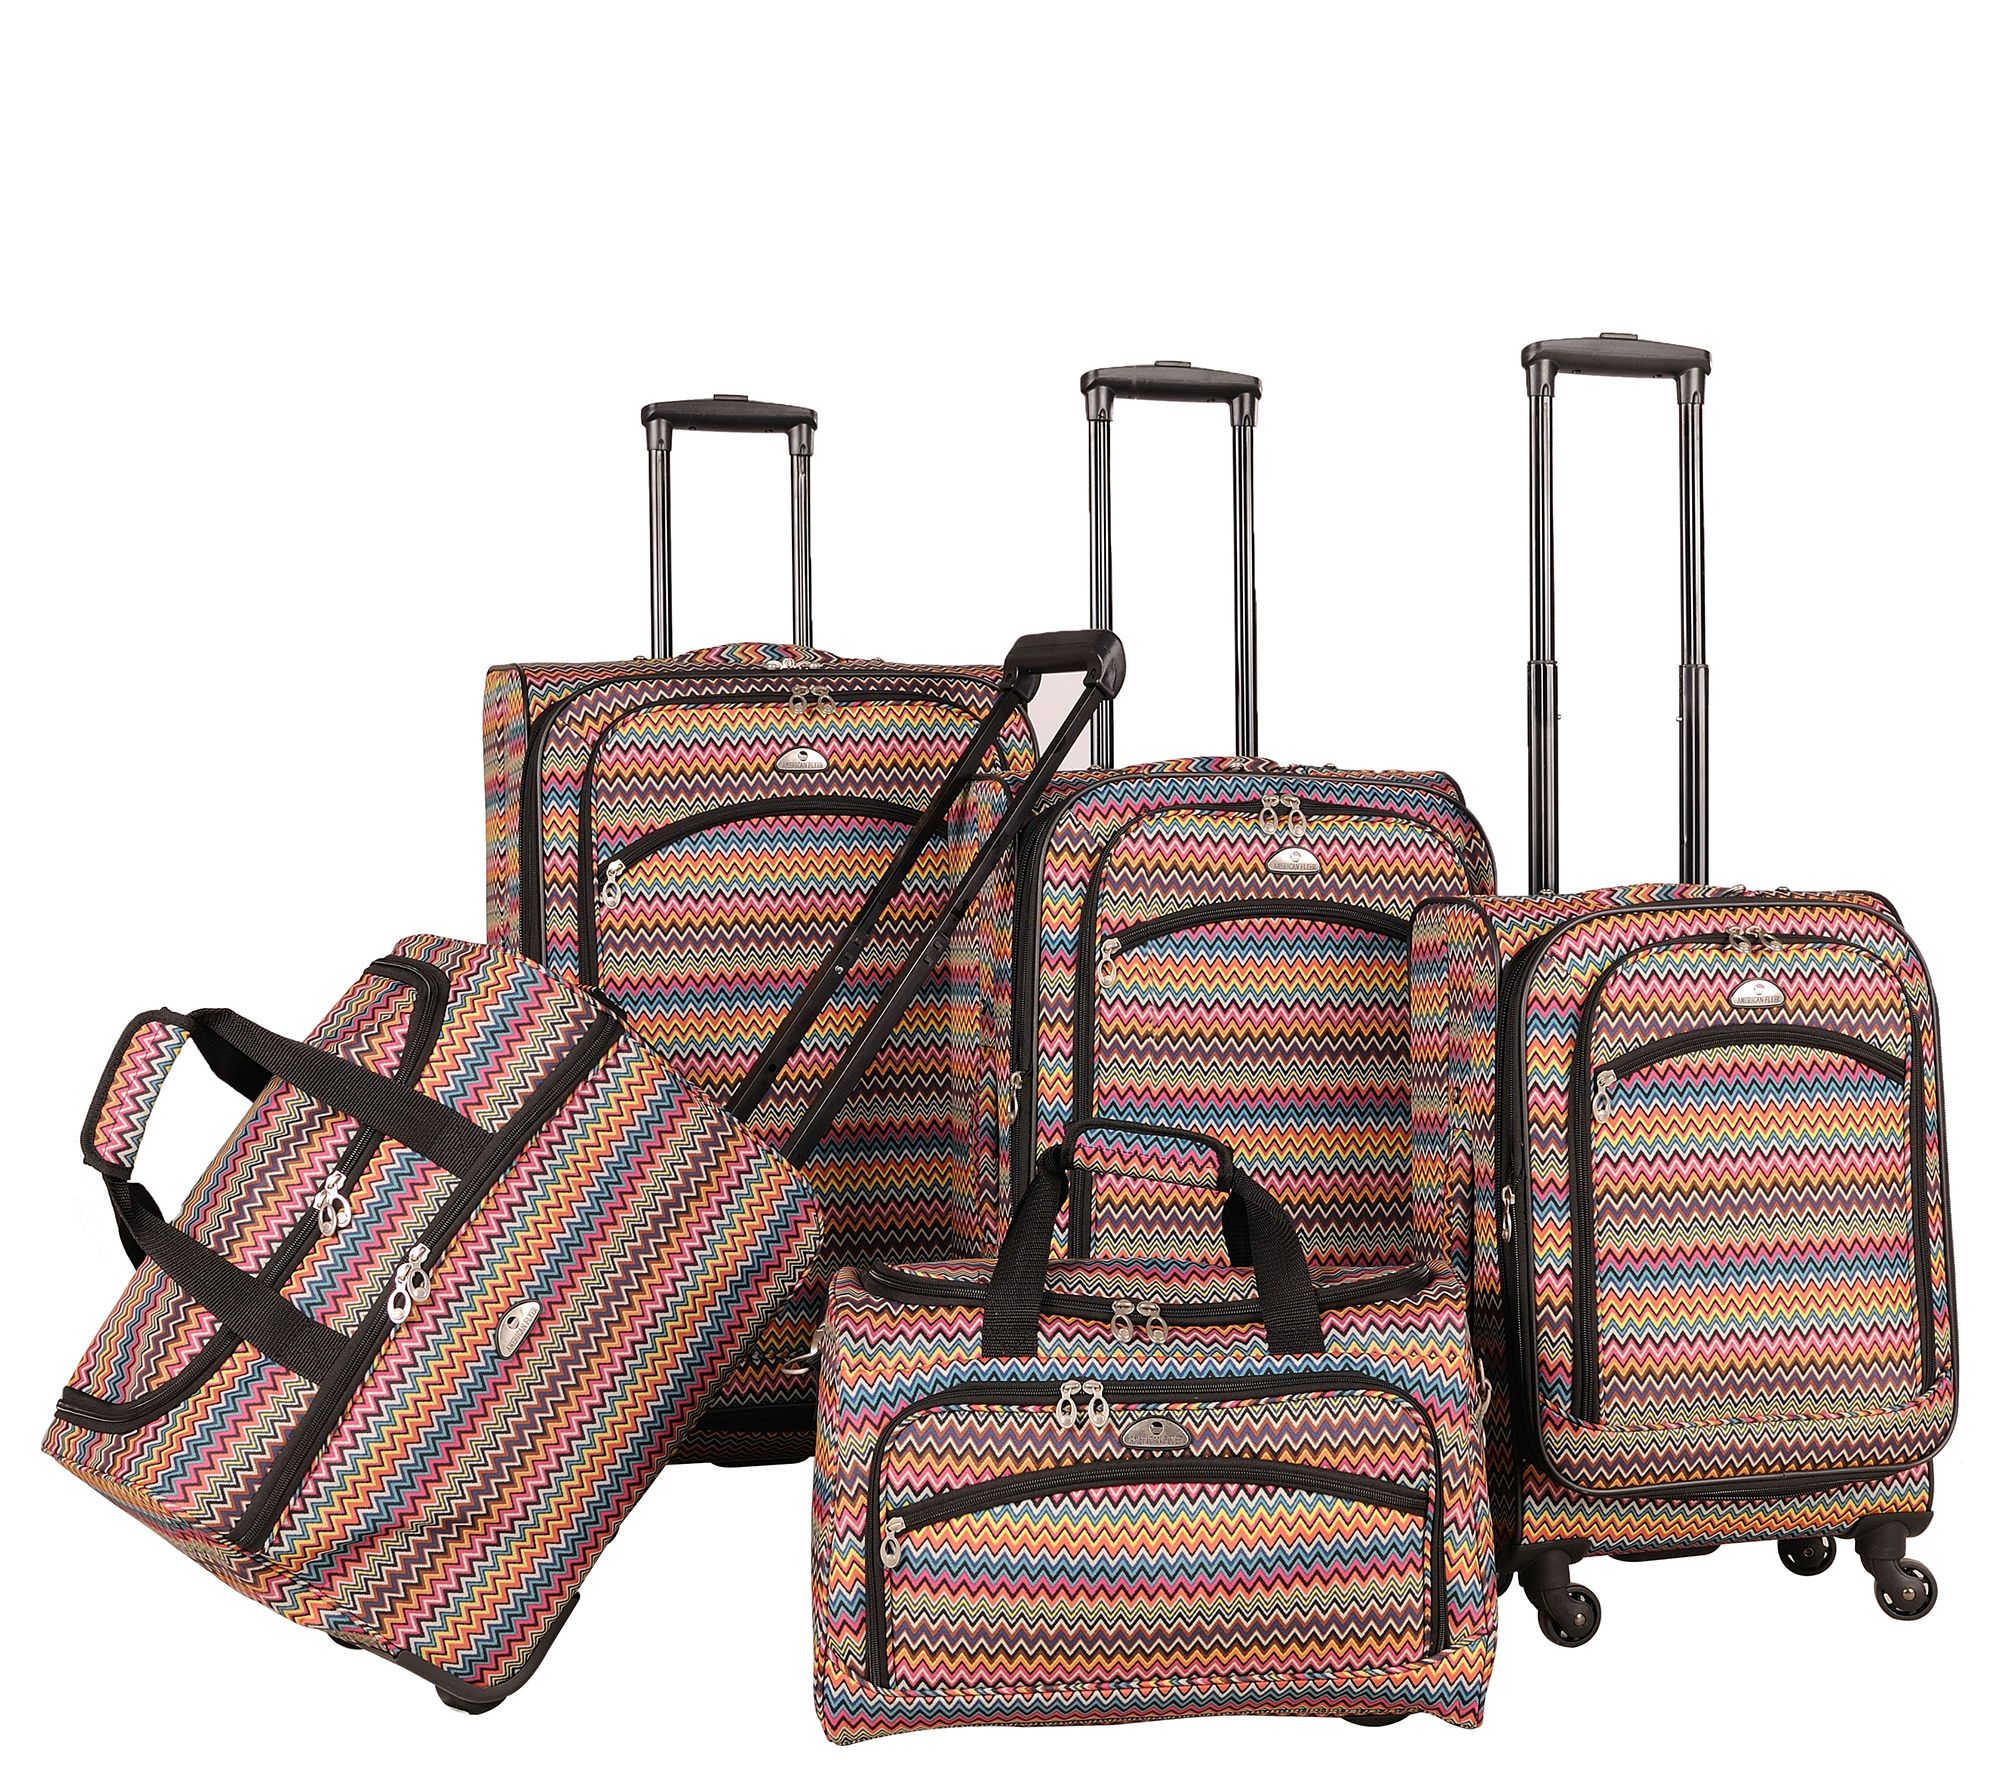 American Flyer Luggage Madrid 5 Piece Spinner Set